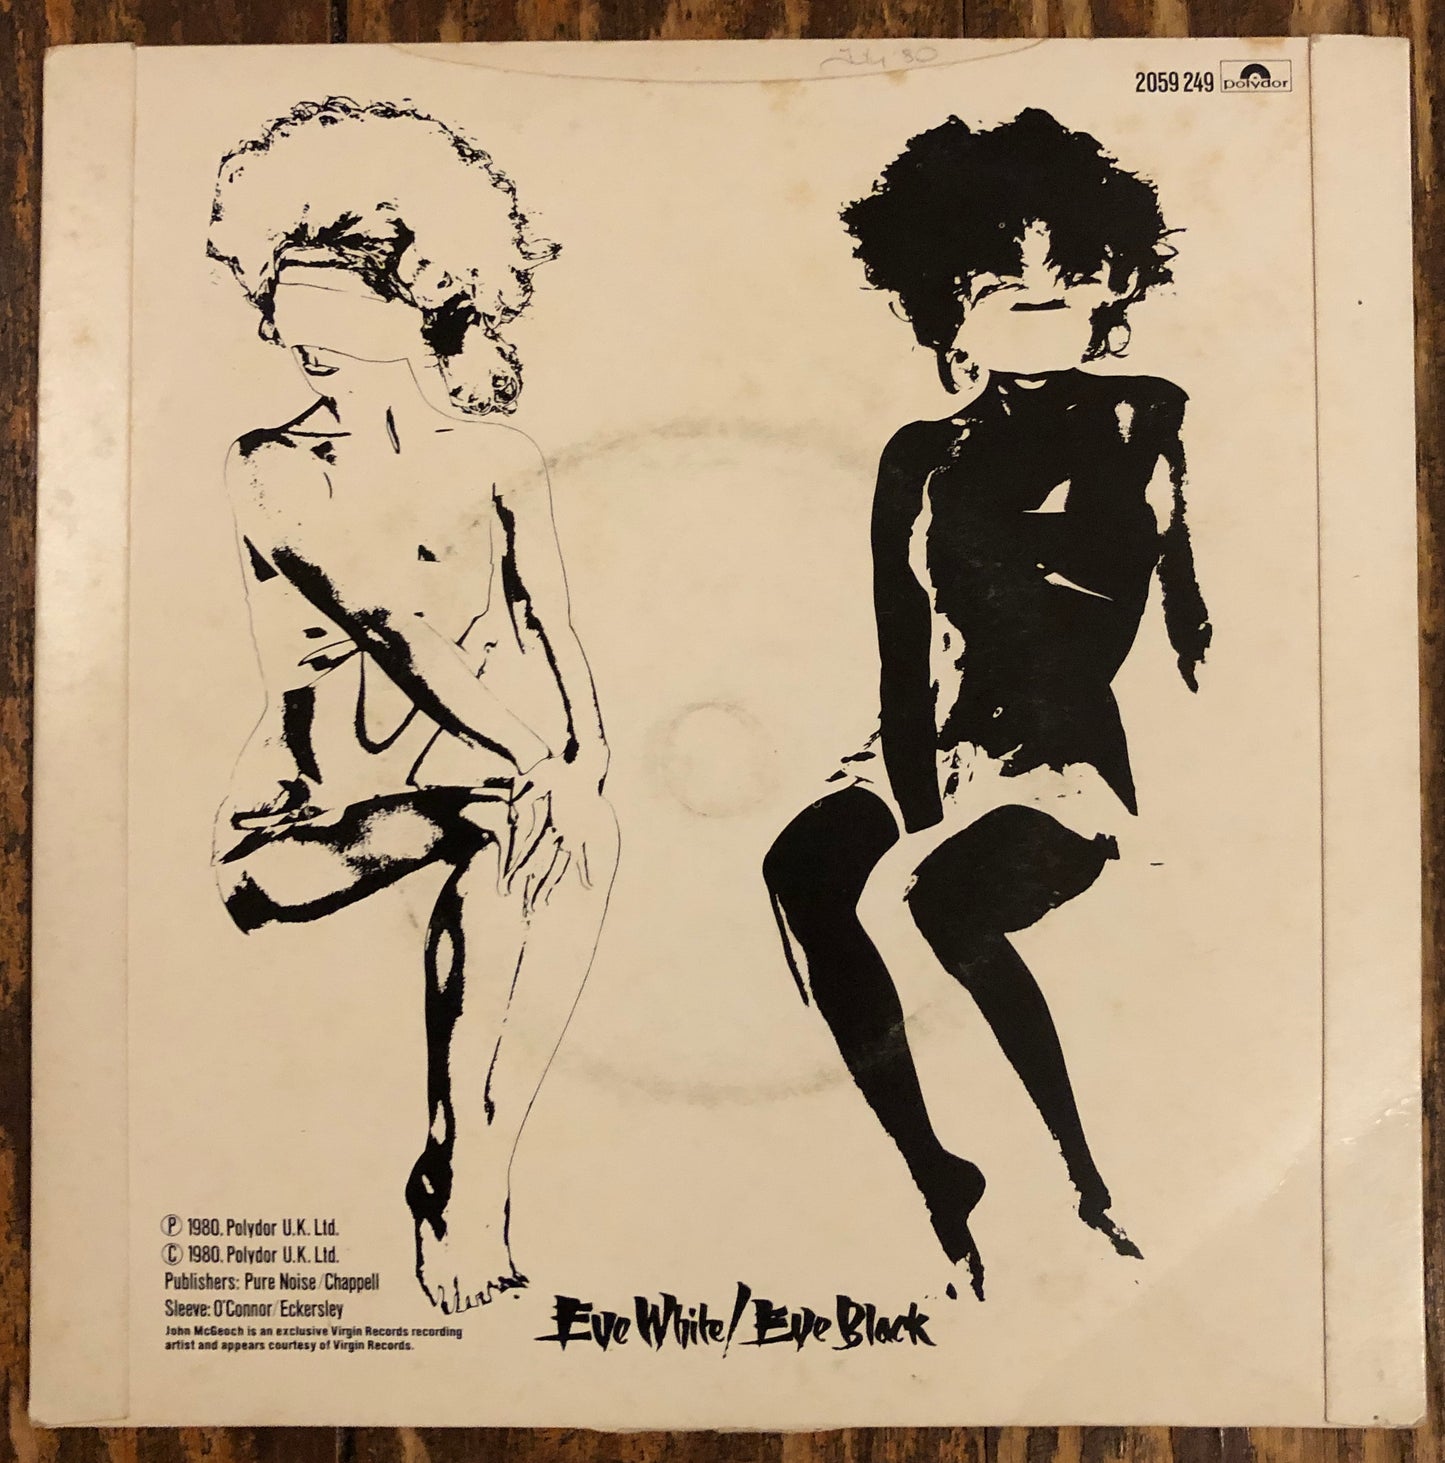 SIOUXSIE AND THE BANSHEES "Christine"